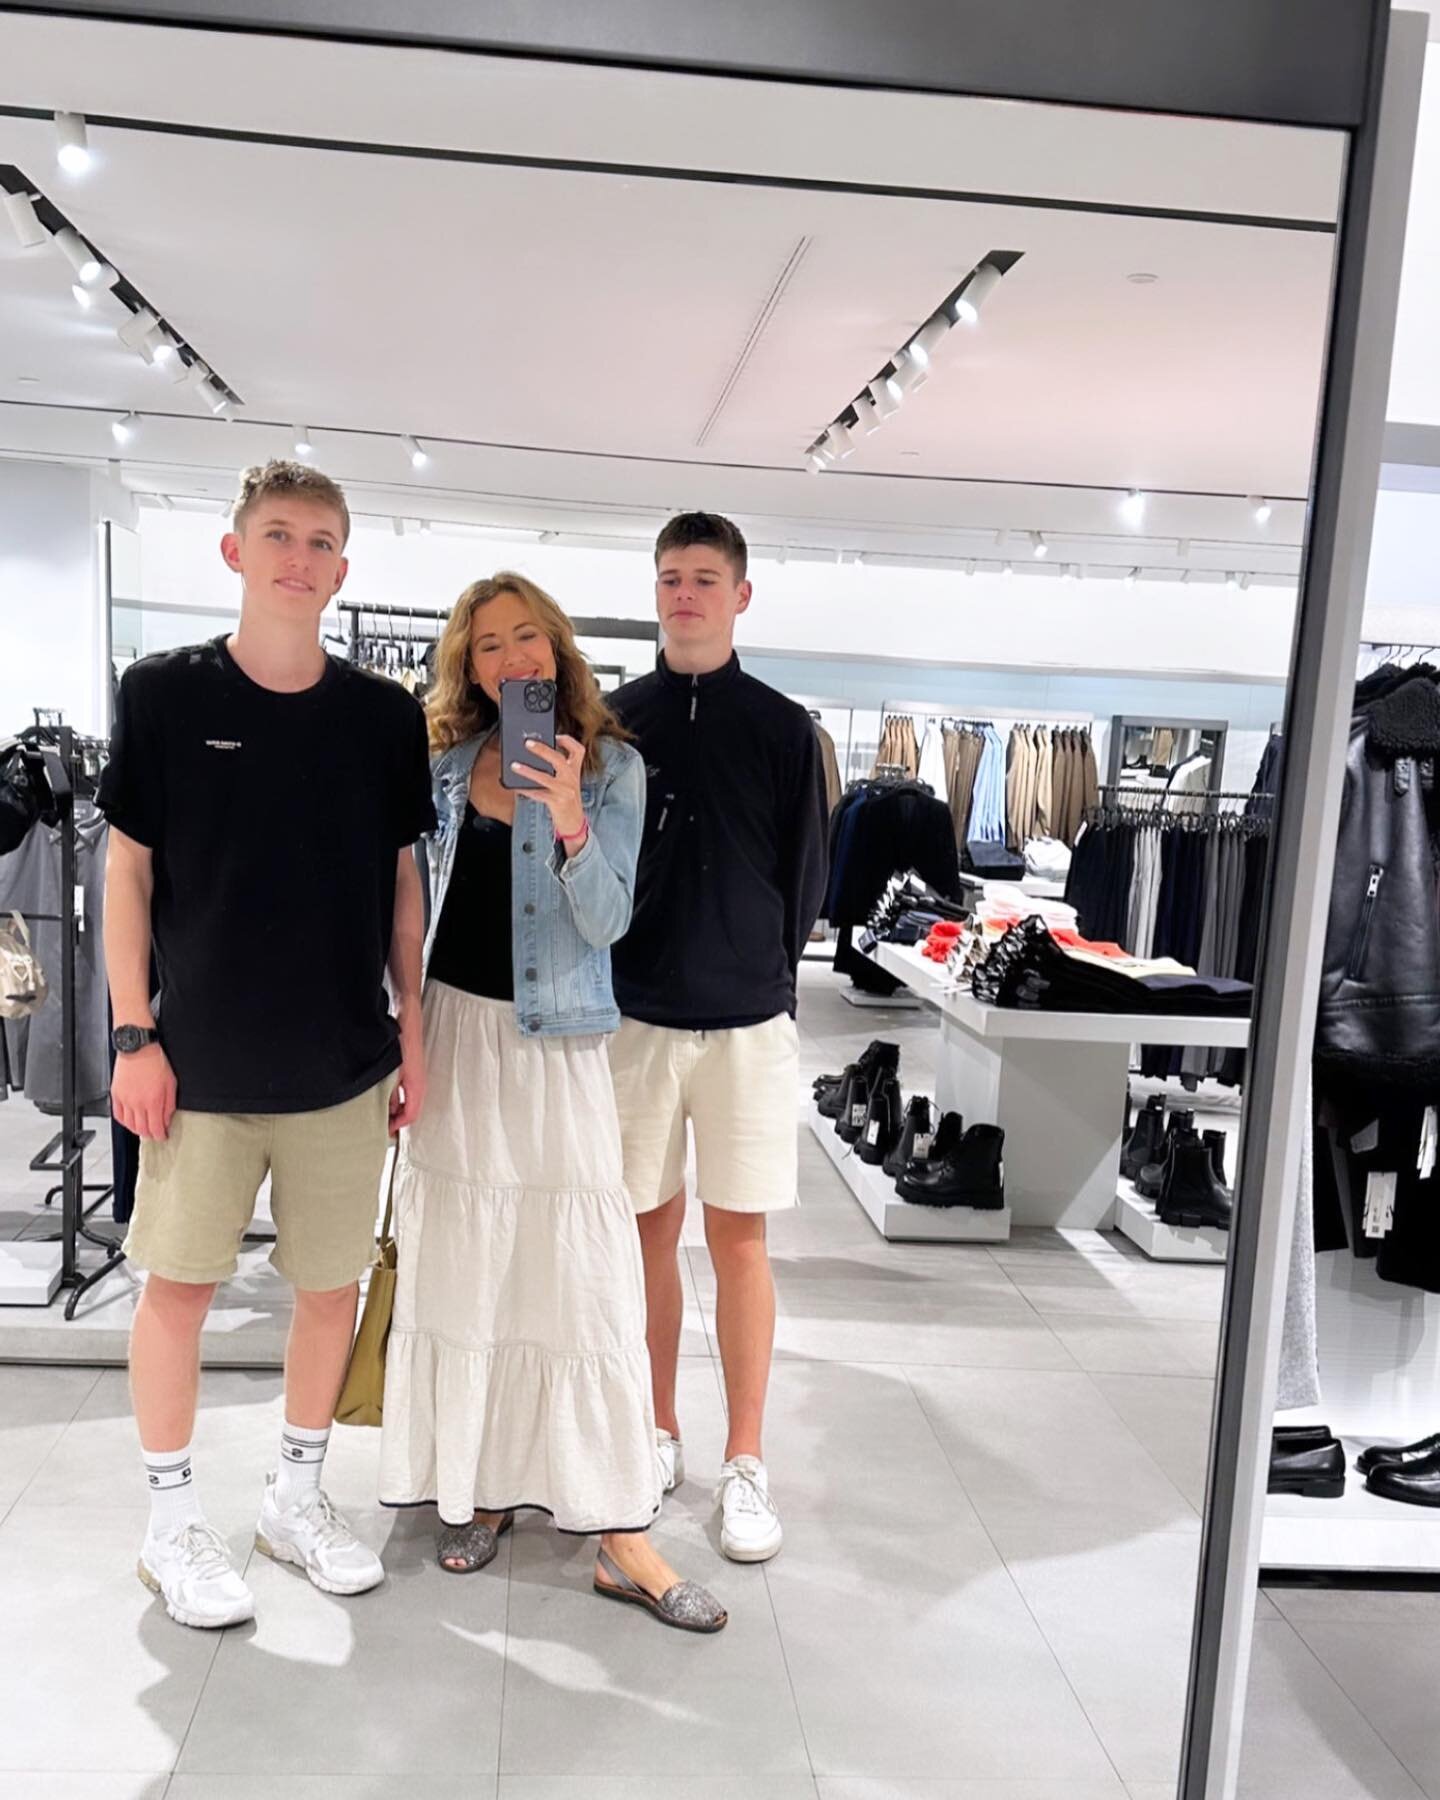 I look so short amongst the boys these days even though I&rsquo;m 176cm🙄 Anyhoo - lovely Mothers Day today with the lads🌸🌸🌸 @_hugomorgan_ @lleomorgan Breakfast, Shopping with bby @_hugomorgan_ driving 🌸 PS: looks like we are dressed in uniform!!